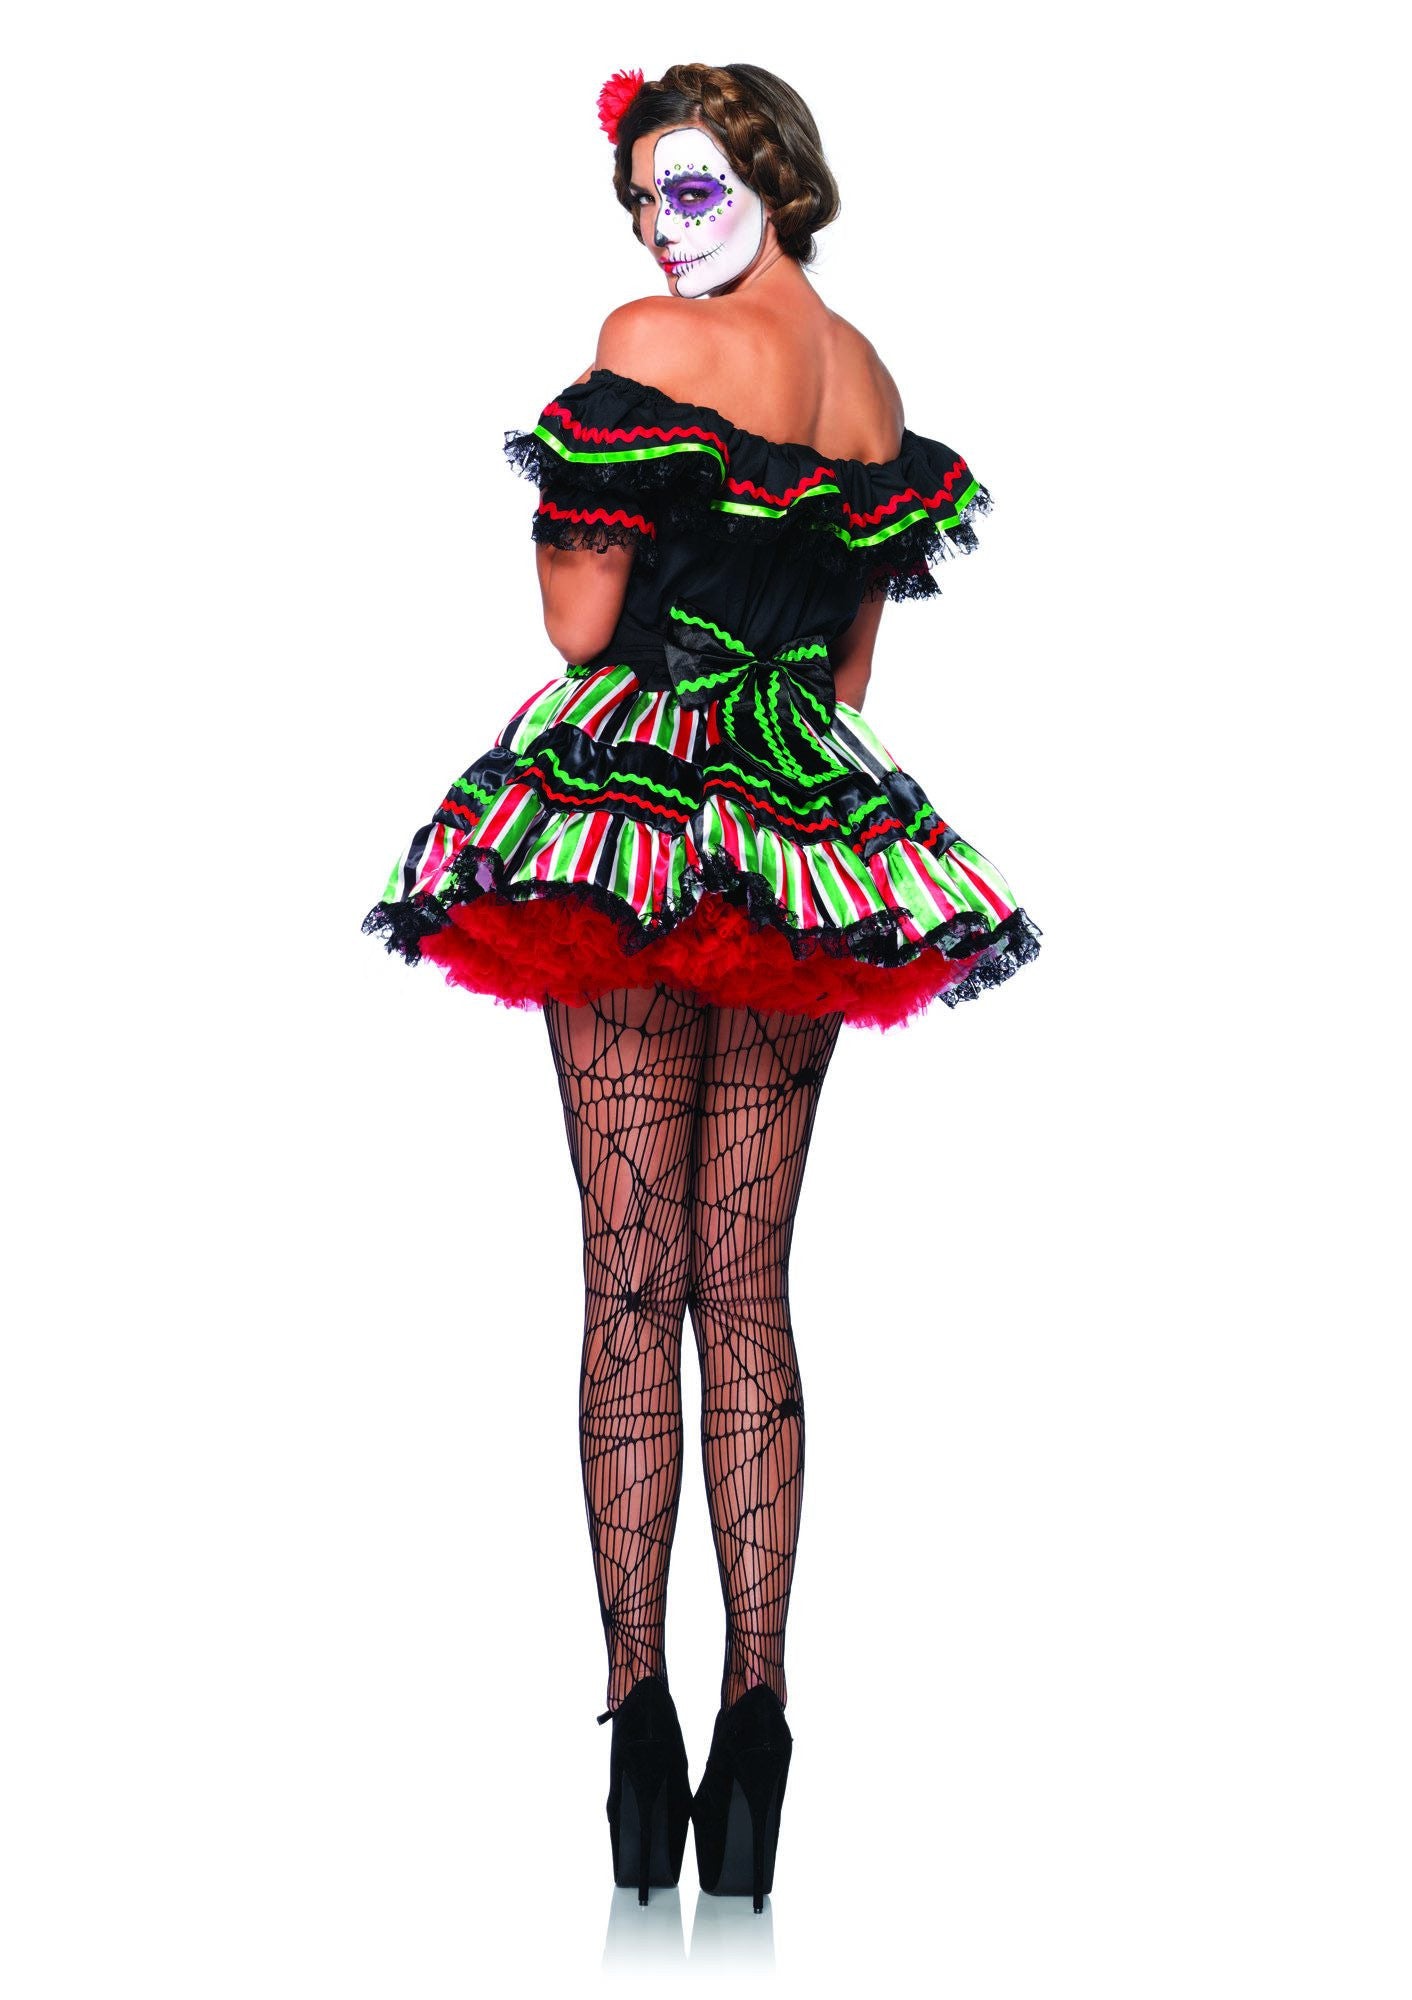 Costume - Day Of The Dead Doll Costume